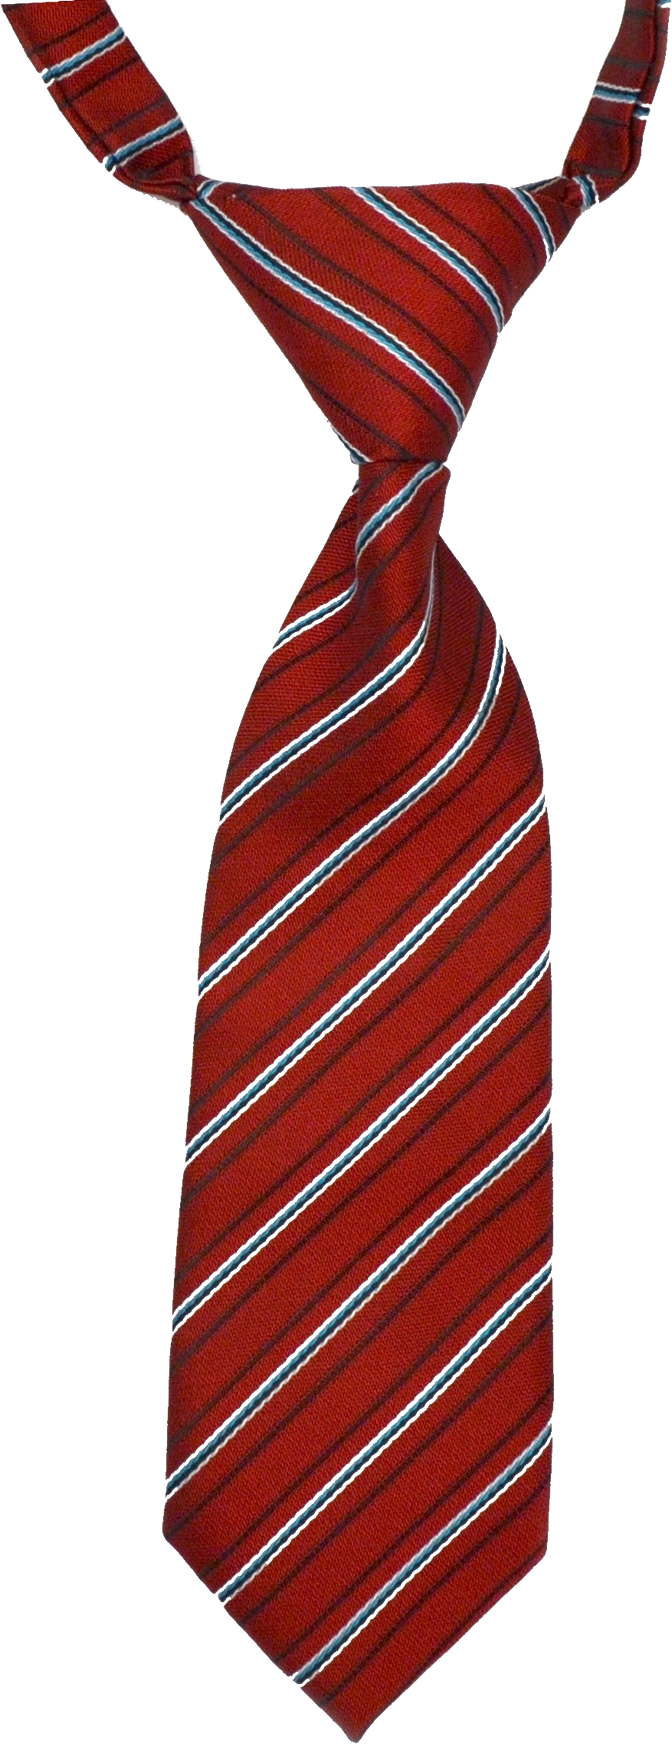 Tie Png Hd - Tie, Transparent background PNG HD thumbnail